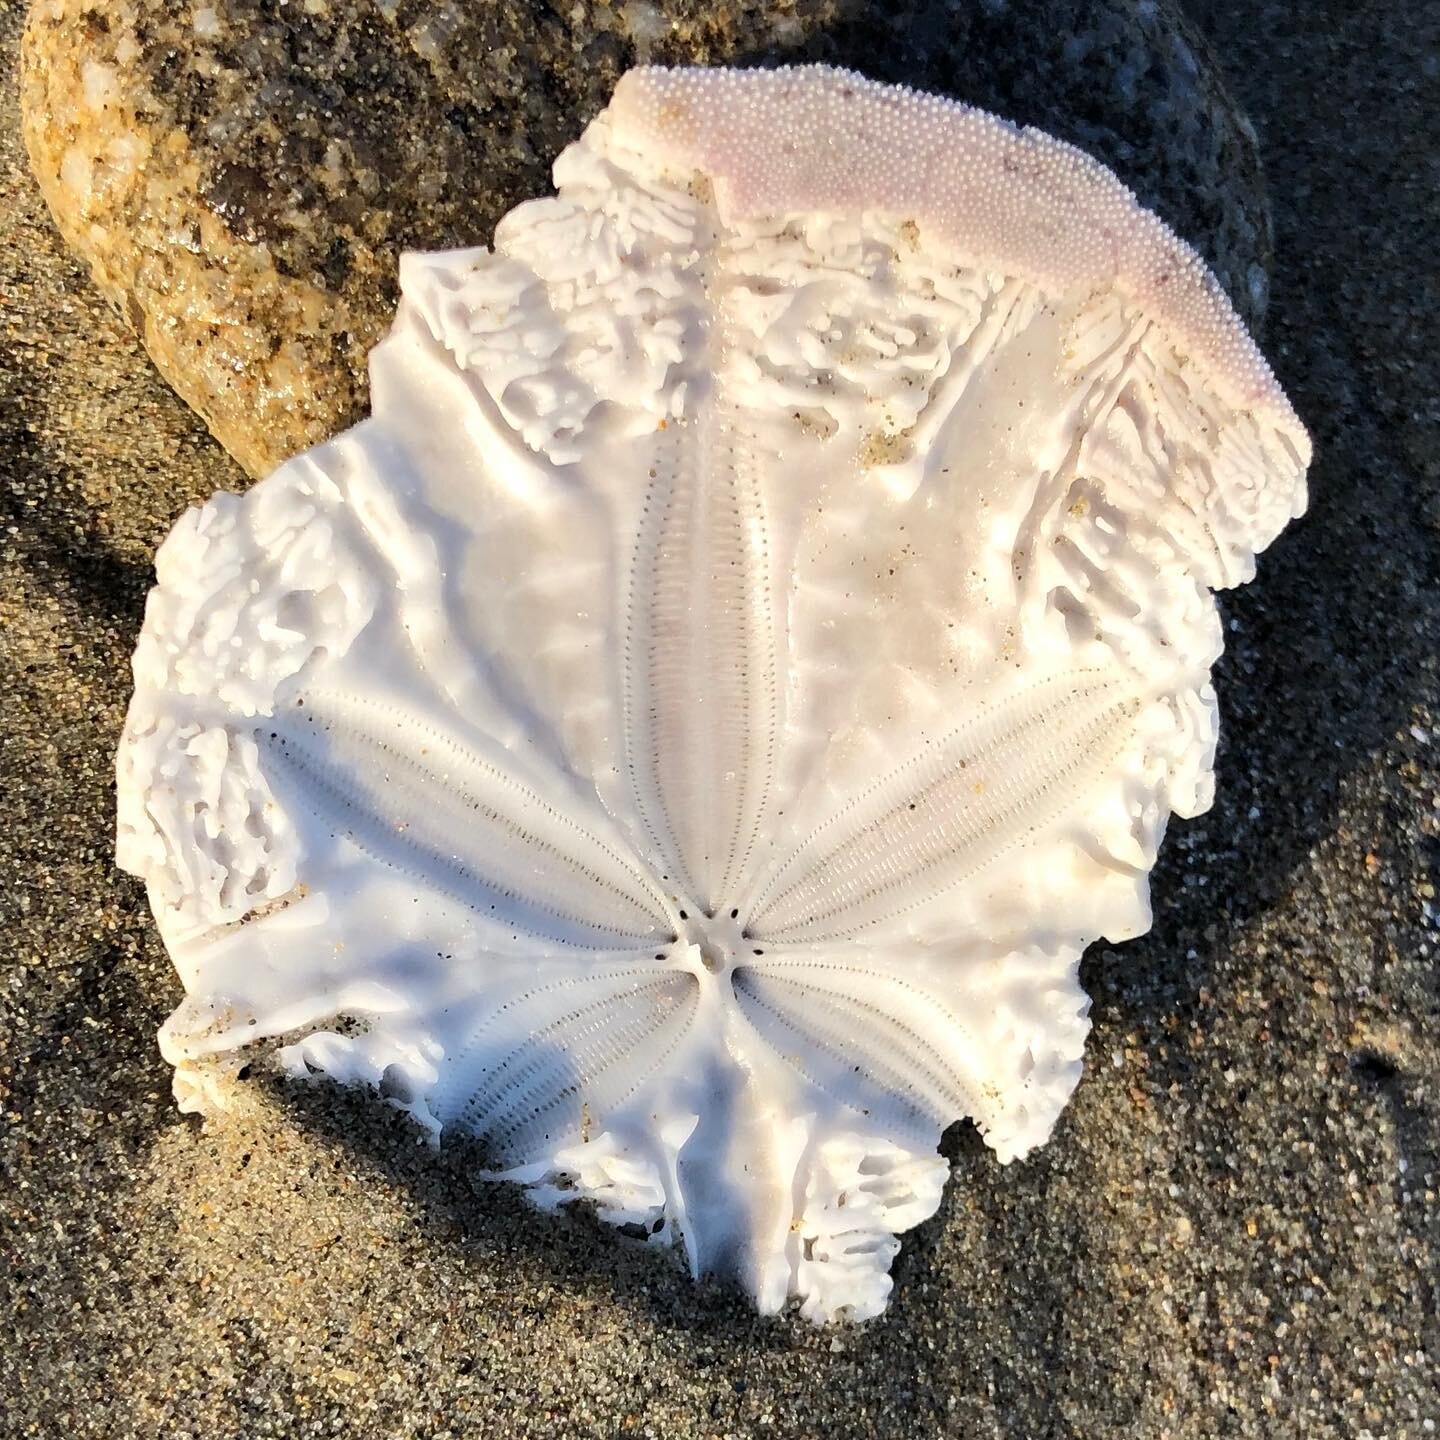 Today we received a beautiful #giftfromthesea 🙏🏼 It&rsquo;s really rare in this area to find a #sanddollar which has broken open like this to expose the inside.  They are just so fragile that the surf consumes them before they are seen.  What a bea